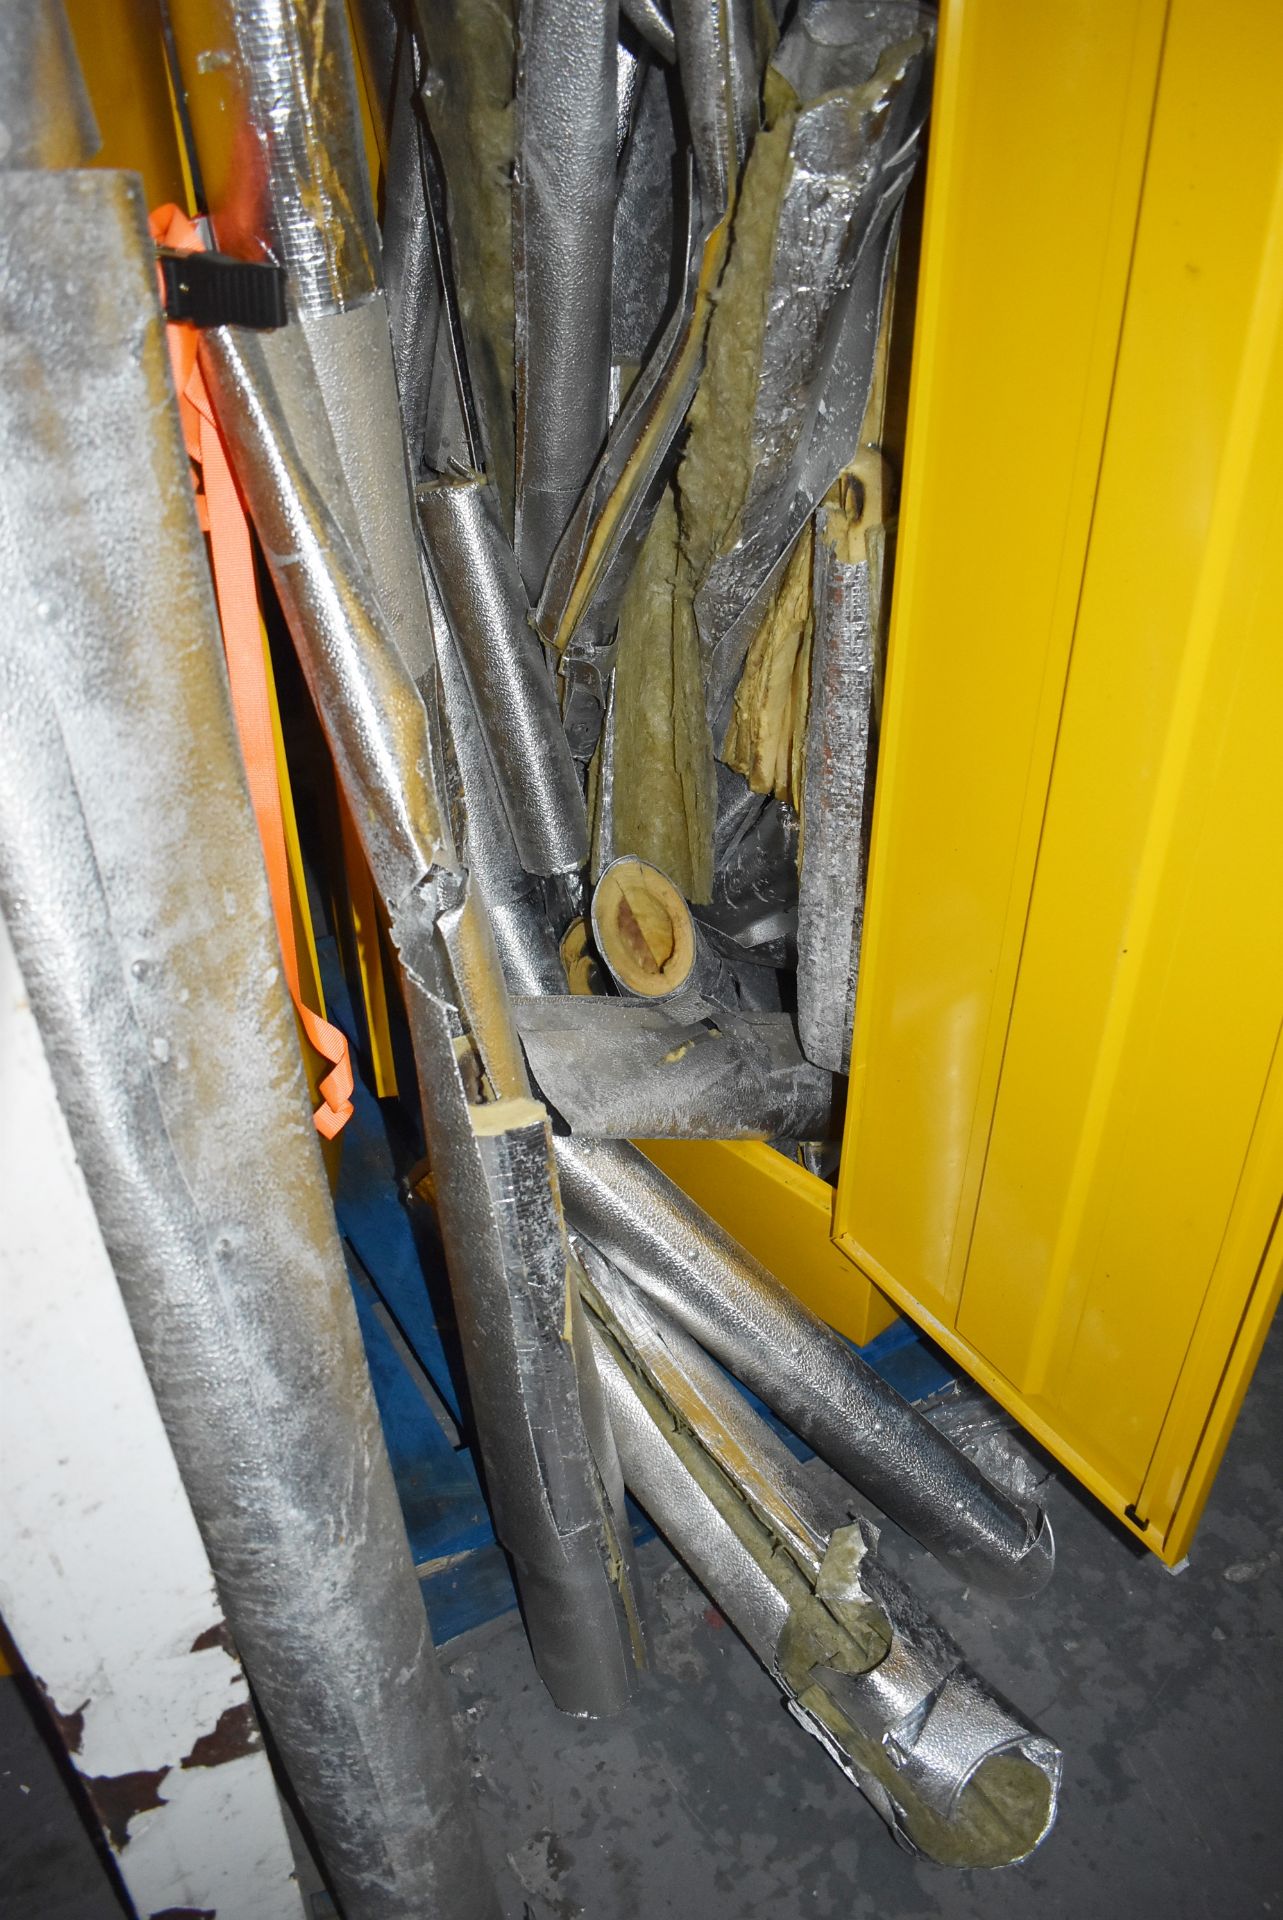 Large Quantity of Thermal Pipe Covering Contents of Two Upright Cabinets - Cabinets Not Included - - Image 6 of 10